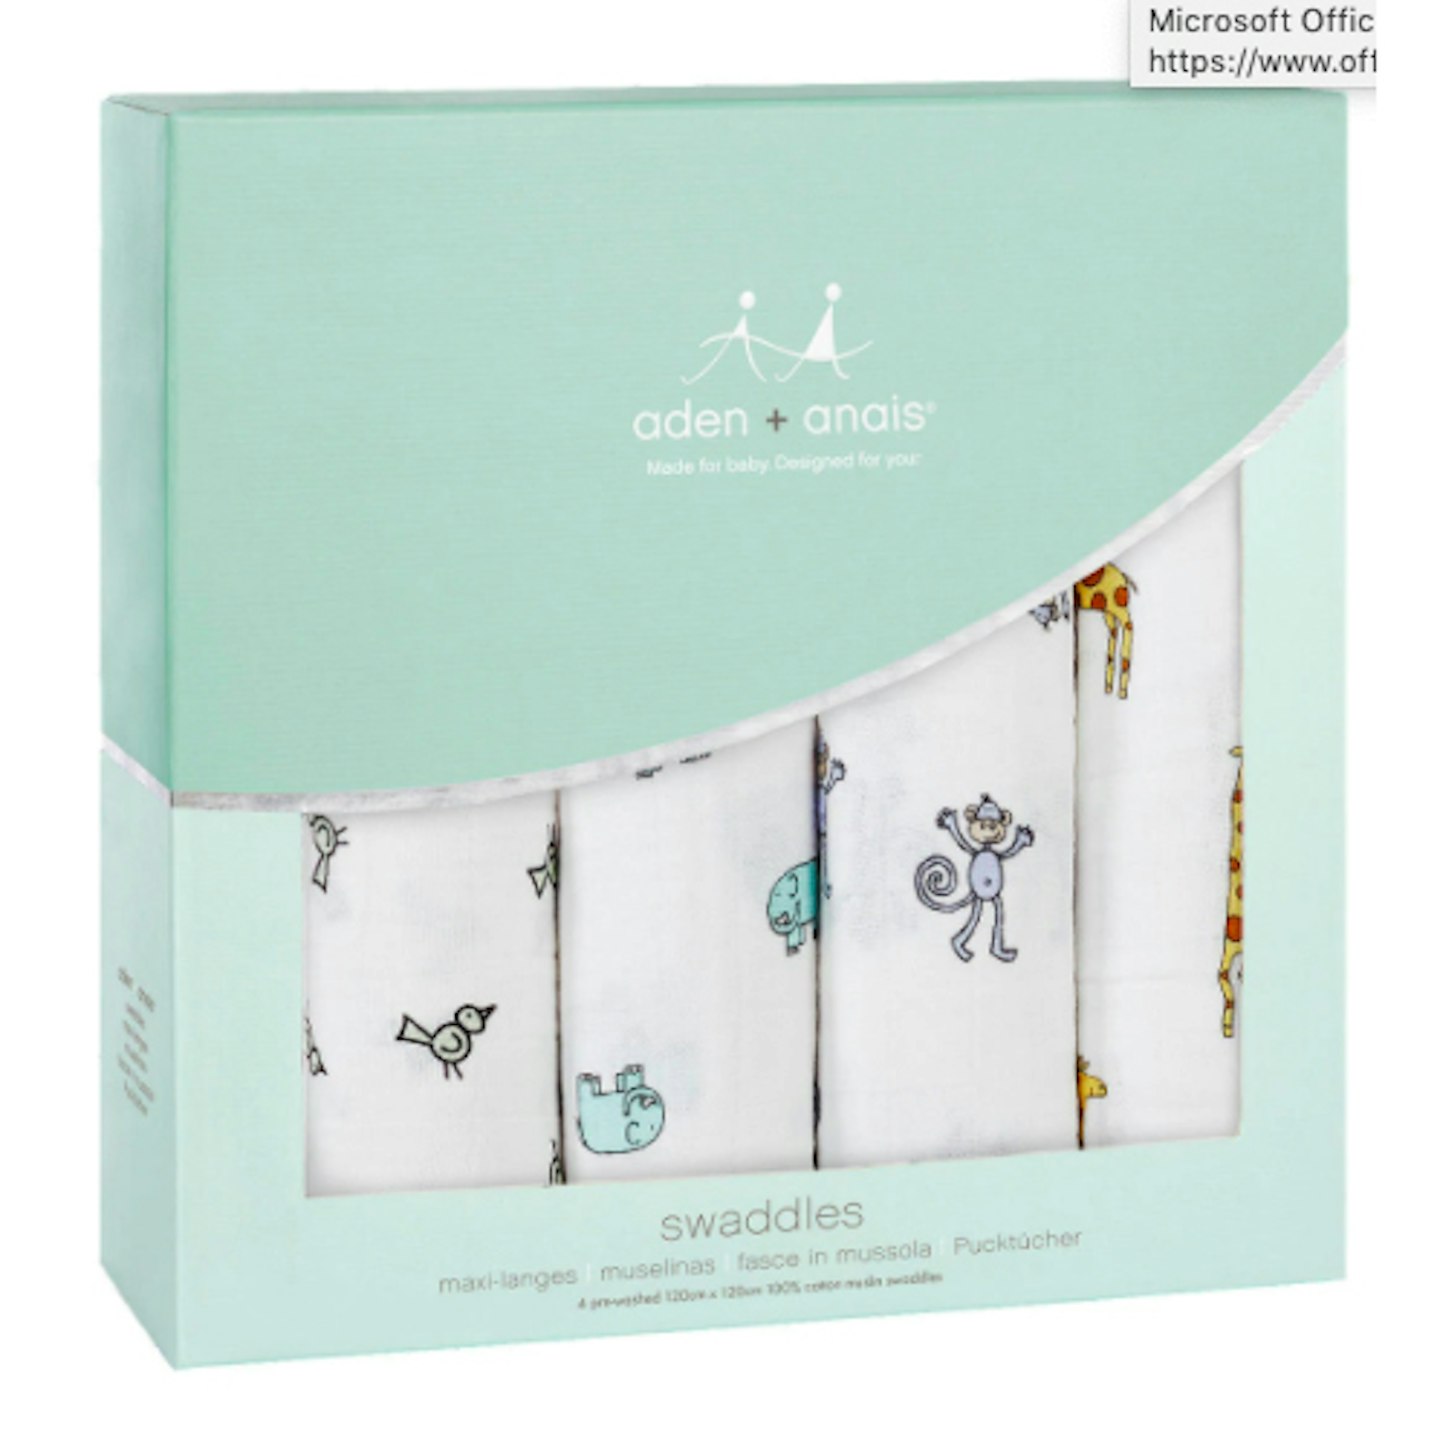 aden + anais Jungle Jam Baby Swaddle Blanket, Pack of 4 - Baby shower gift